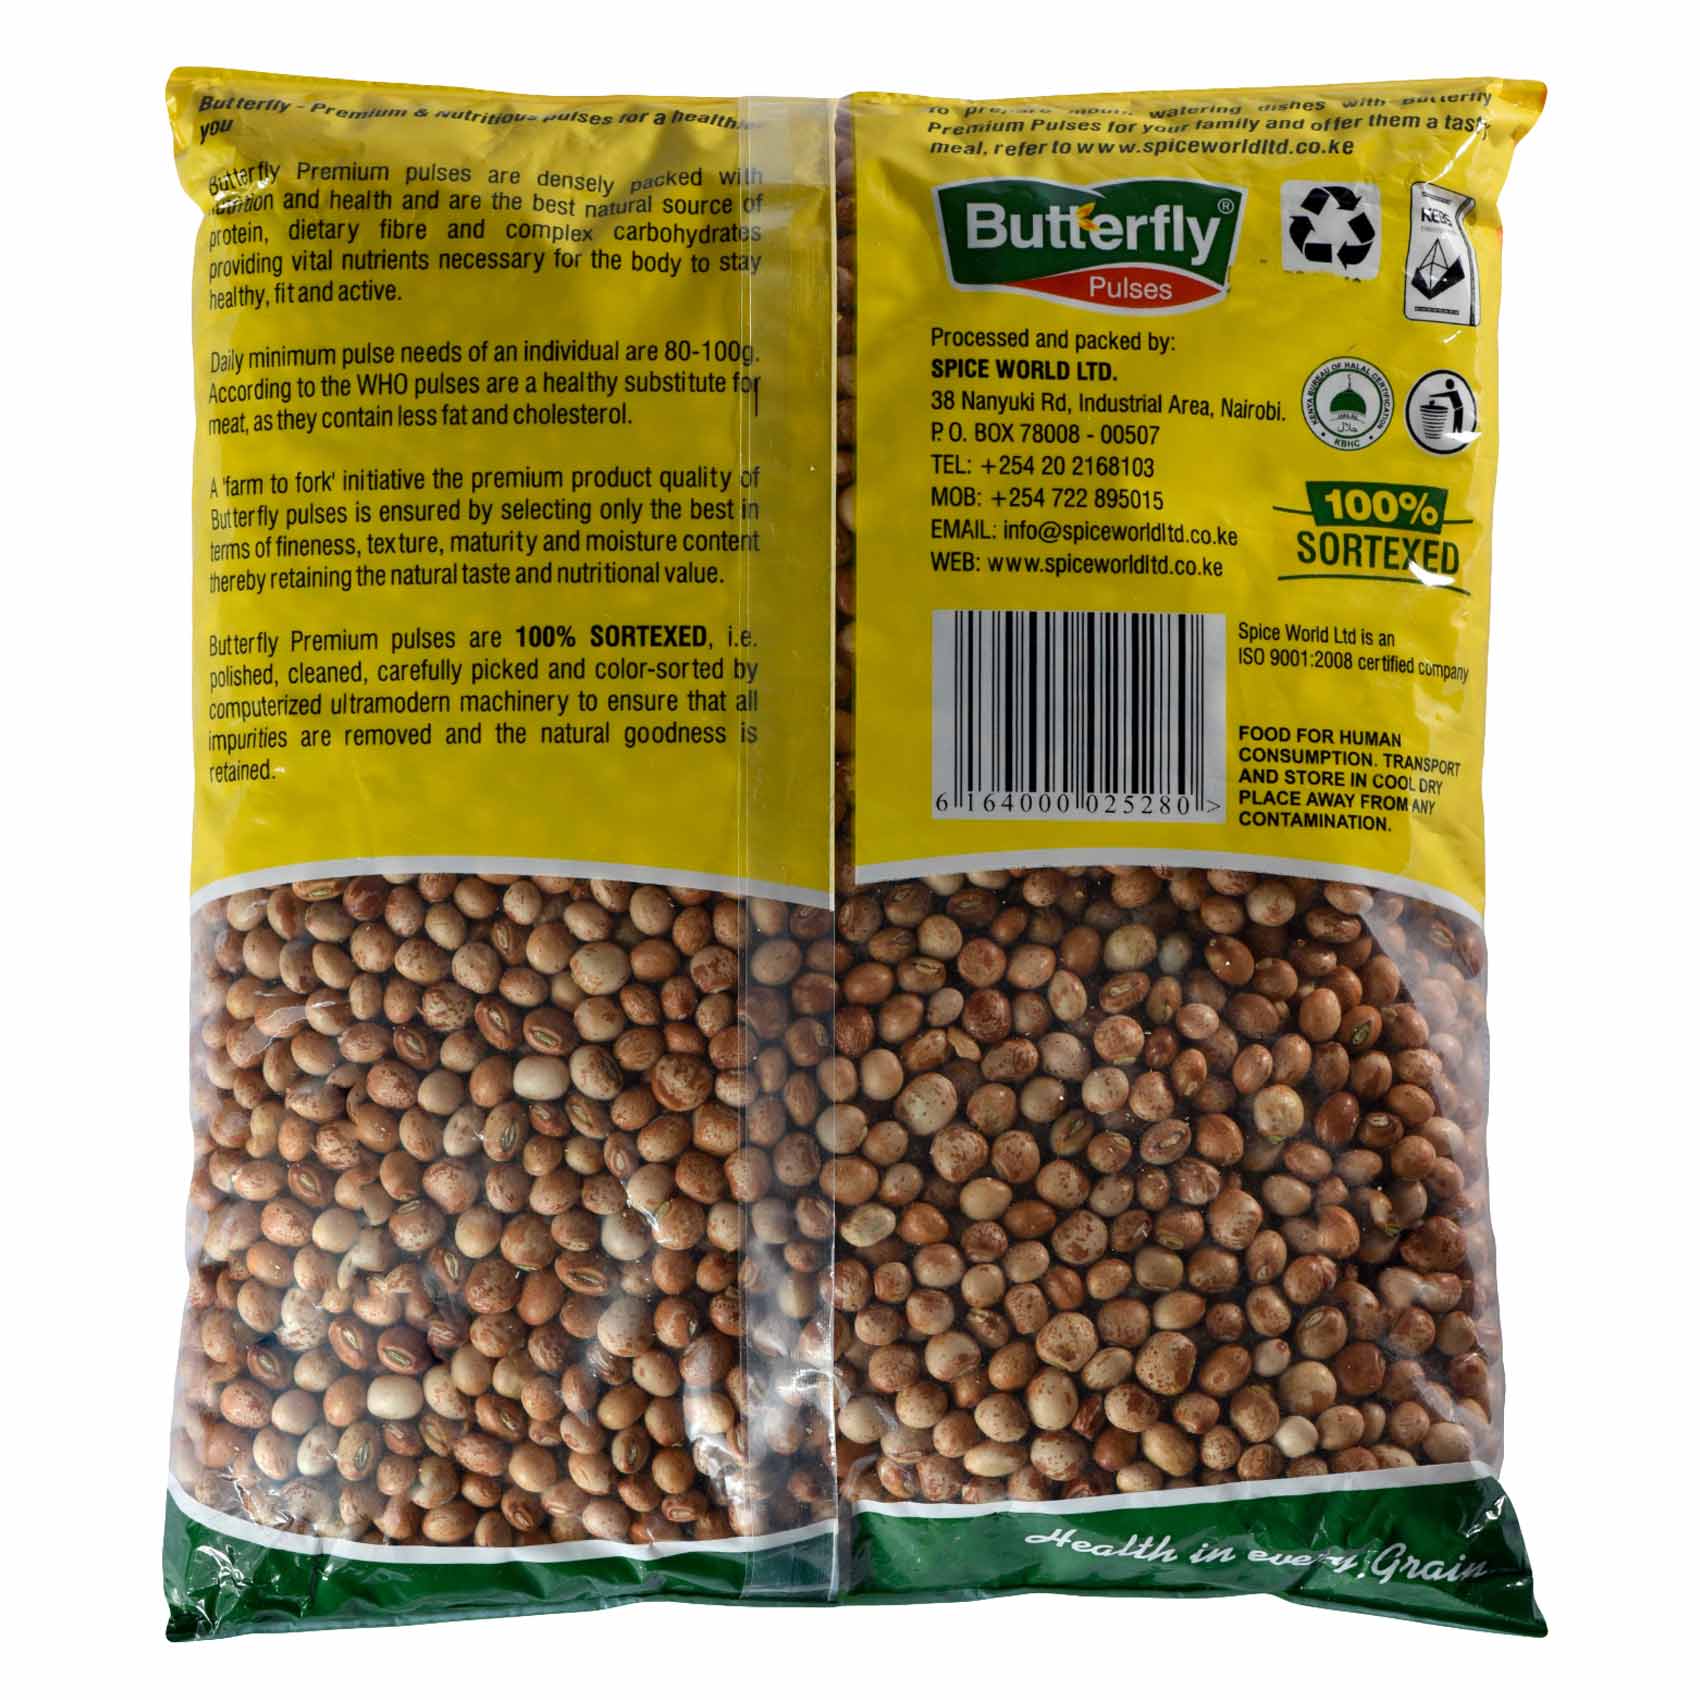 Butterfly Pigeon Peas Washed Toor Dal 1Kg